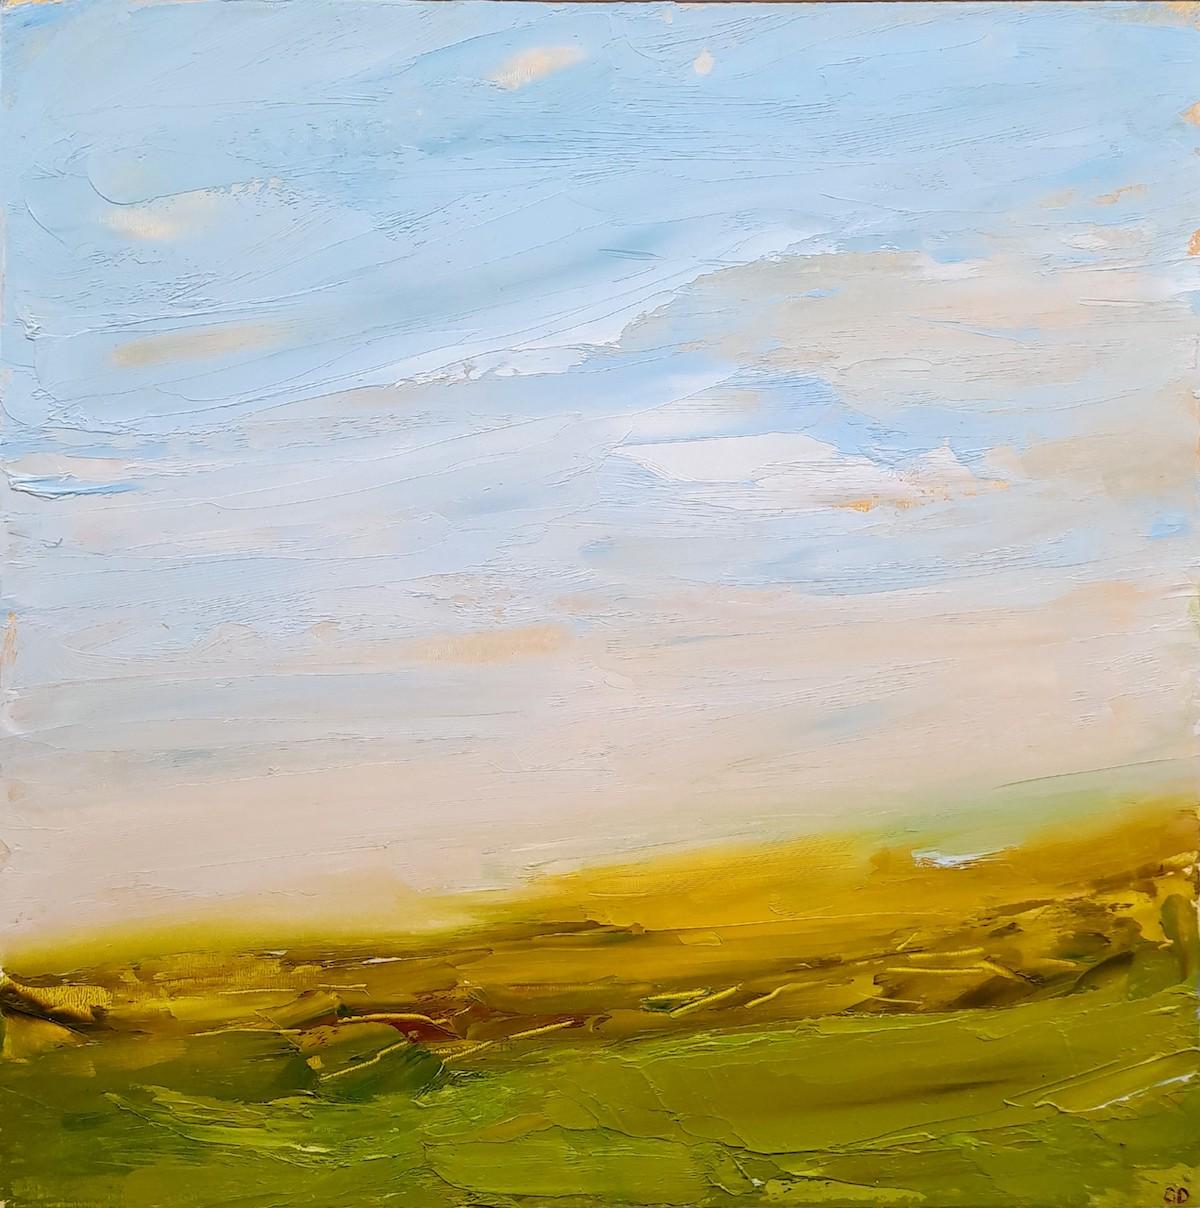 Georgie Dowling  Figurative Painting - Early Morning Dartmoor by Georgie Dowling, Contemporary landscape painting 